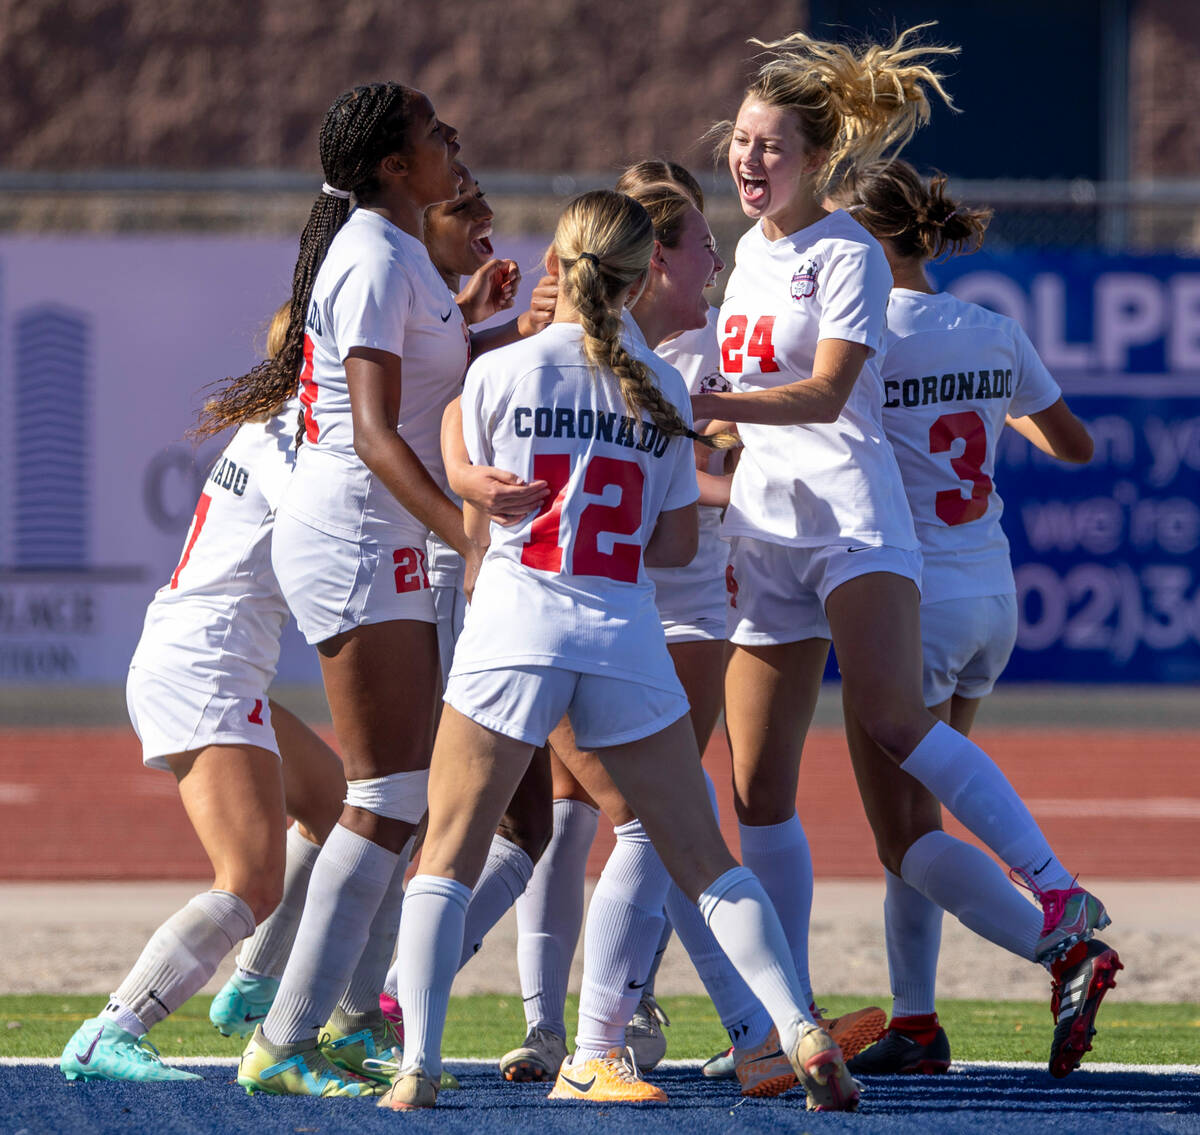 Coronado players celebrate their goal against Bishop Gorman during the second half of their Cla ...